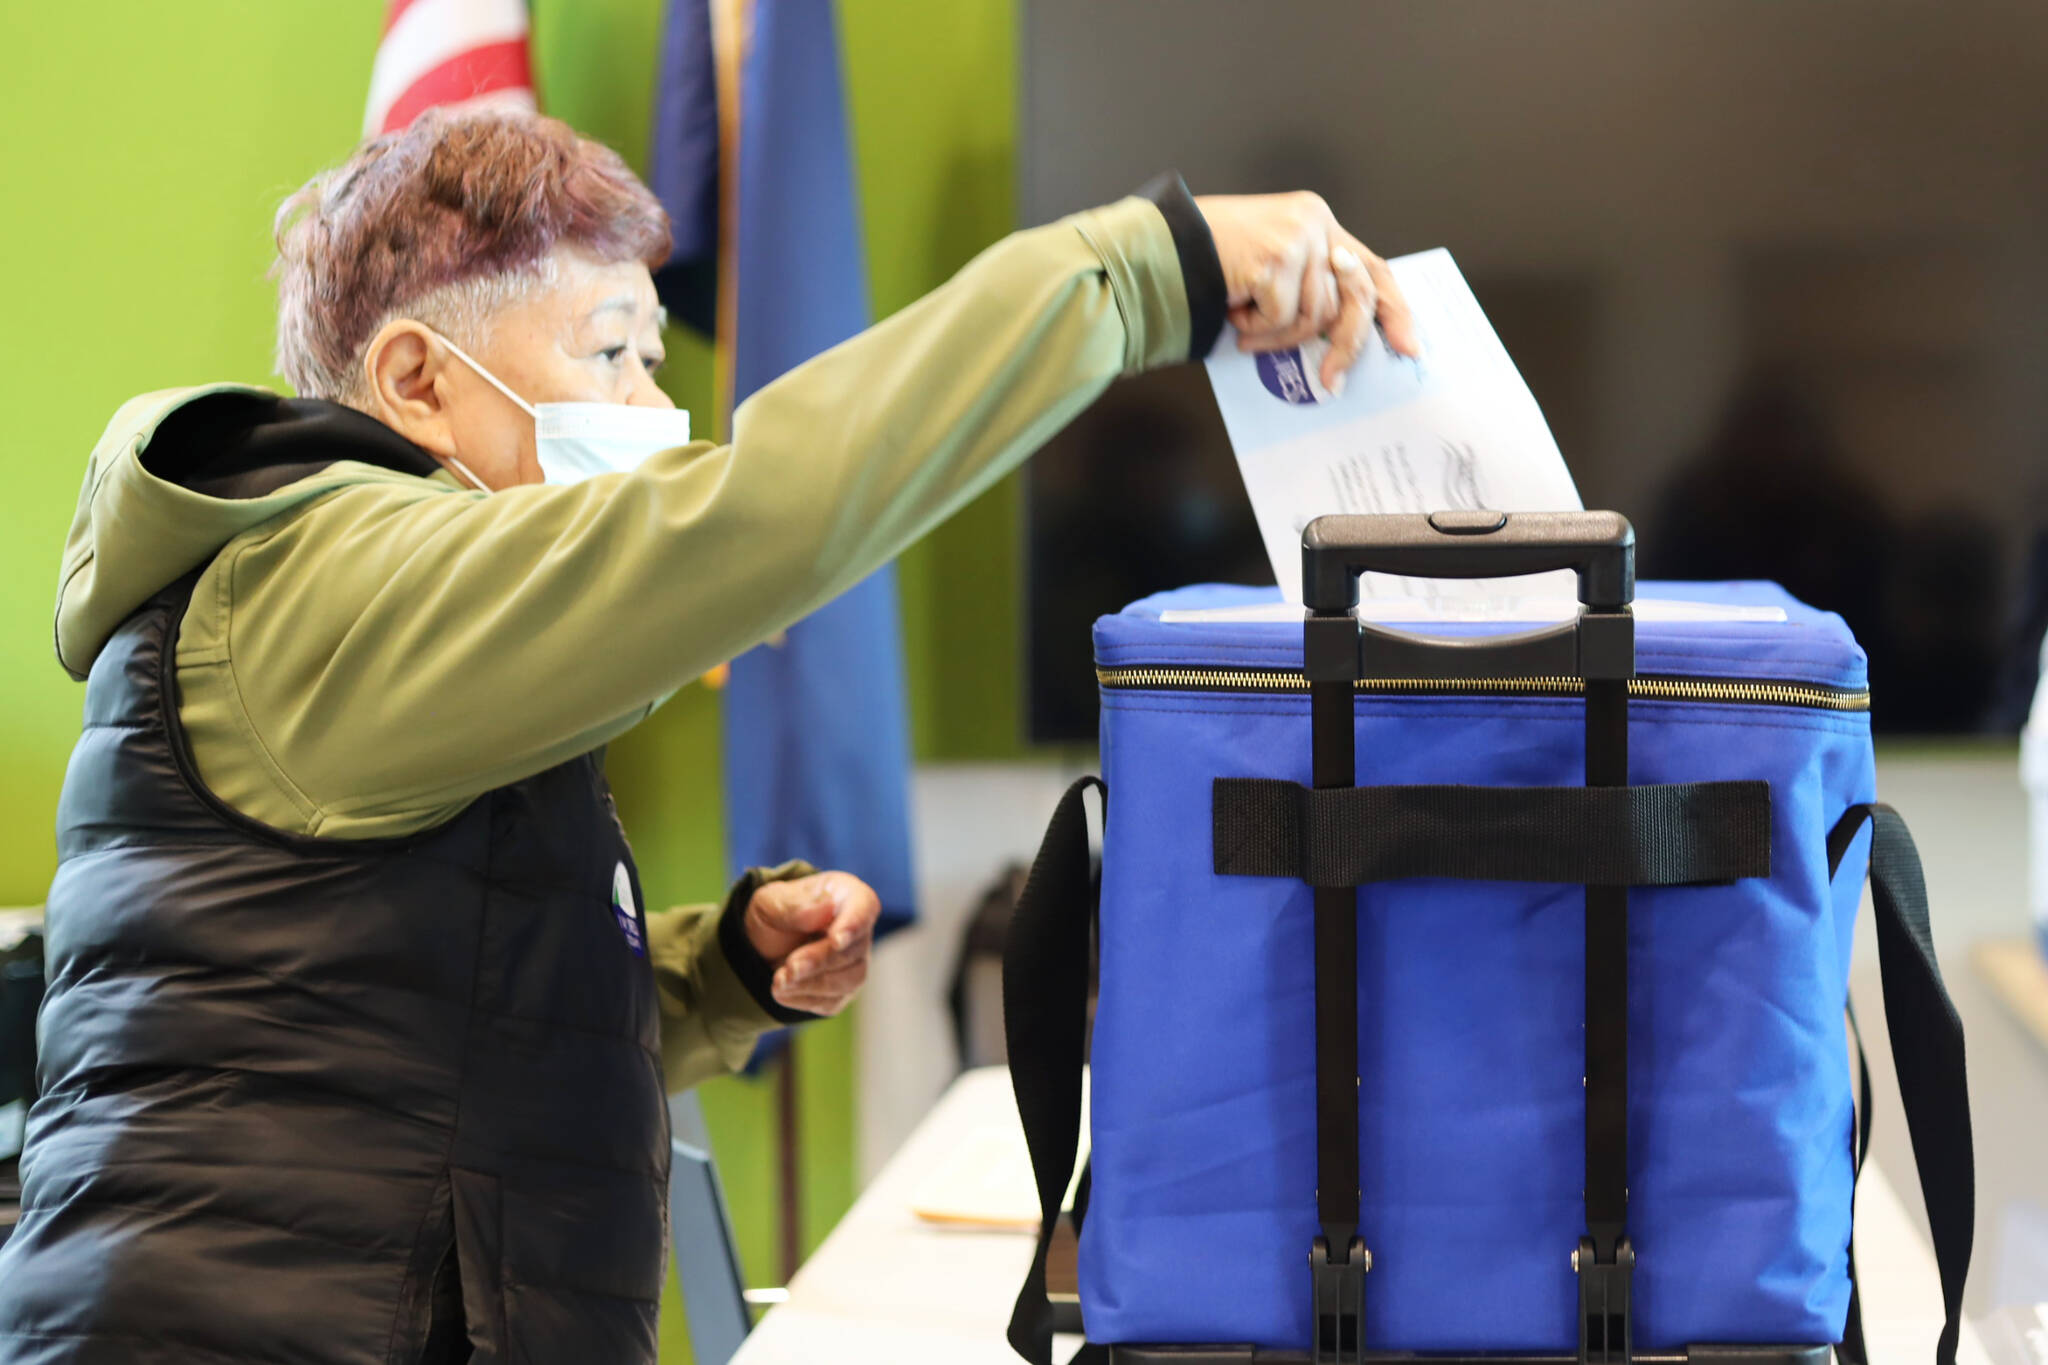 Editha Harris drops her ballot in the ballot box at the voter center located at the Mendenhall Valley Public Library on Tuesday afternoon. (Clarise Larson / Juneau Empire)